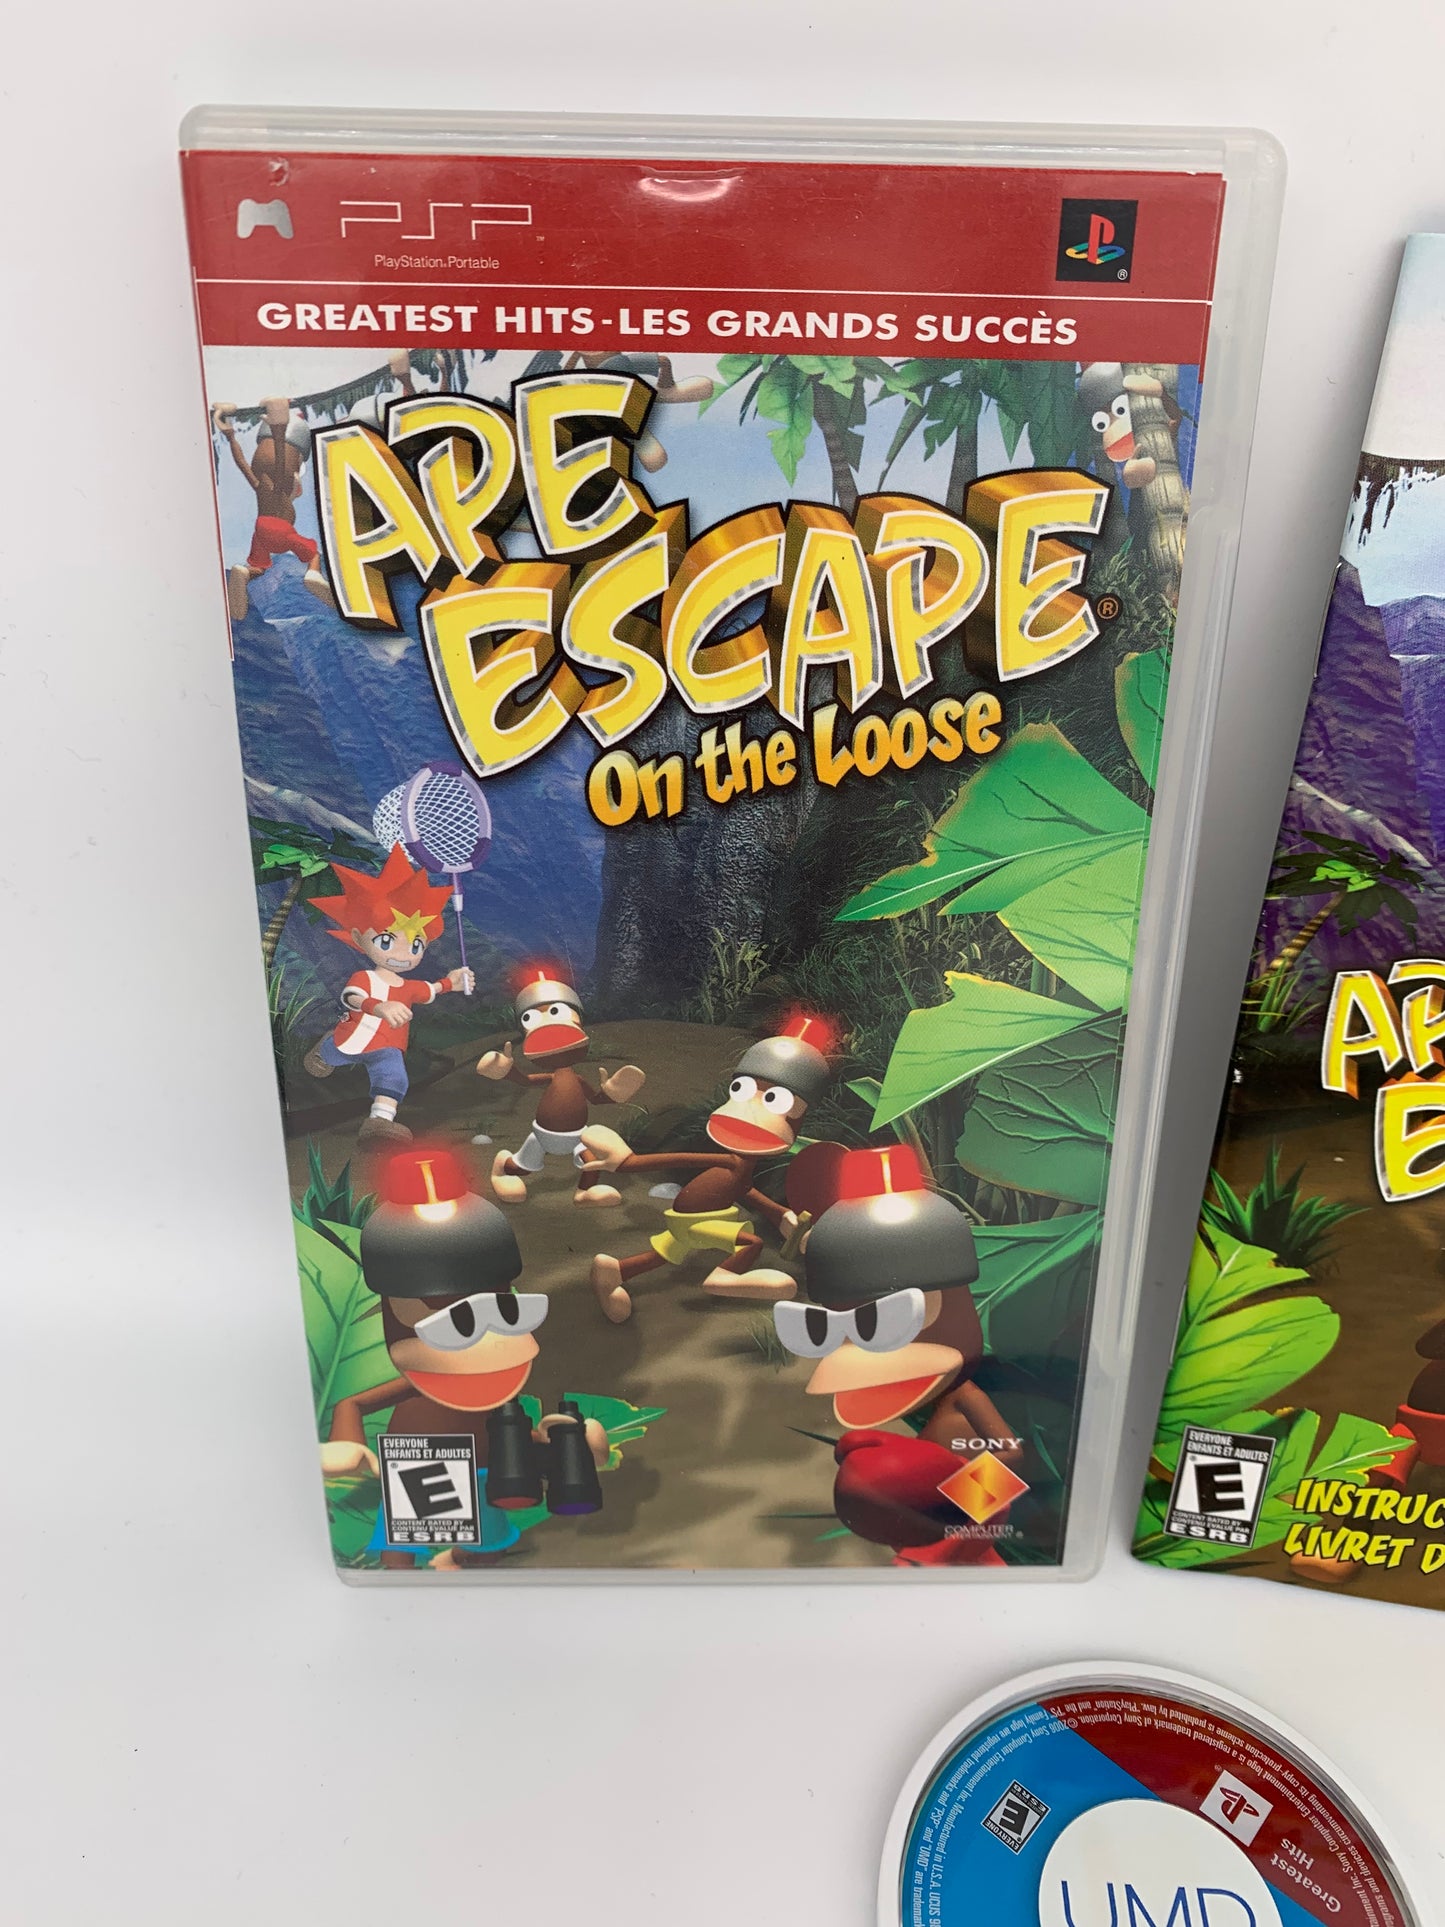 SONY PLAYSTATiON PORTABLE [PSP] | APE ESCAPE ON THE LOOSE | GREATEST HiTS